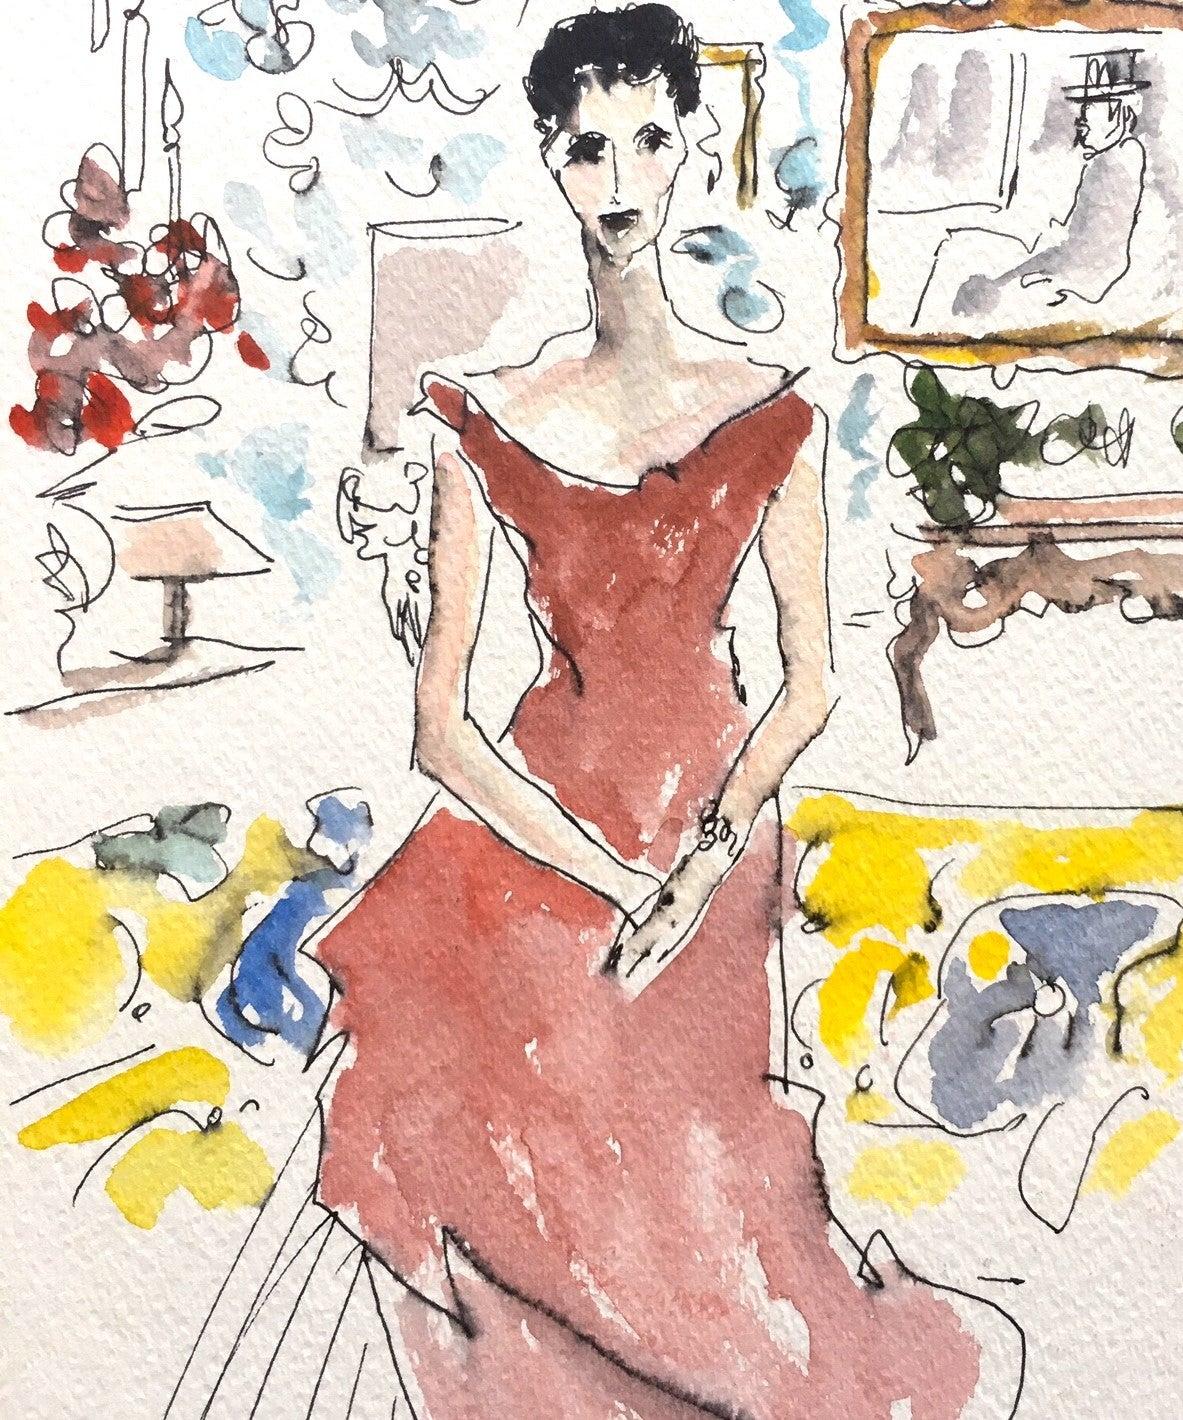 Lunch at the Ritz, and Babe Paley at Home, Set by Manuel Santelices
Unique piece
Individual Image size: 12 in. H x 9 in. W 
Overall Image size: 12 in. H x 18 in. W 
Unframed

The worlds of fashion, society and pop culture are explored through the